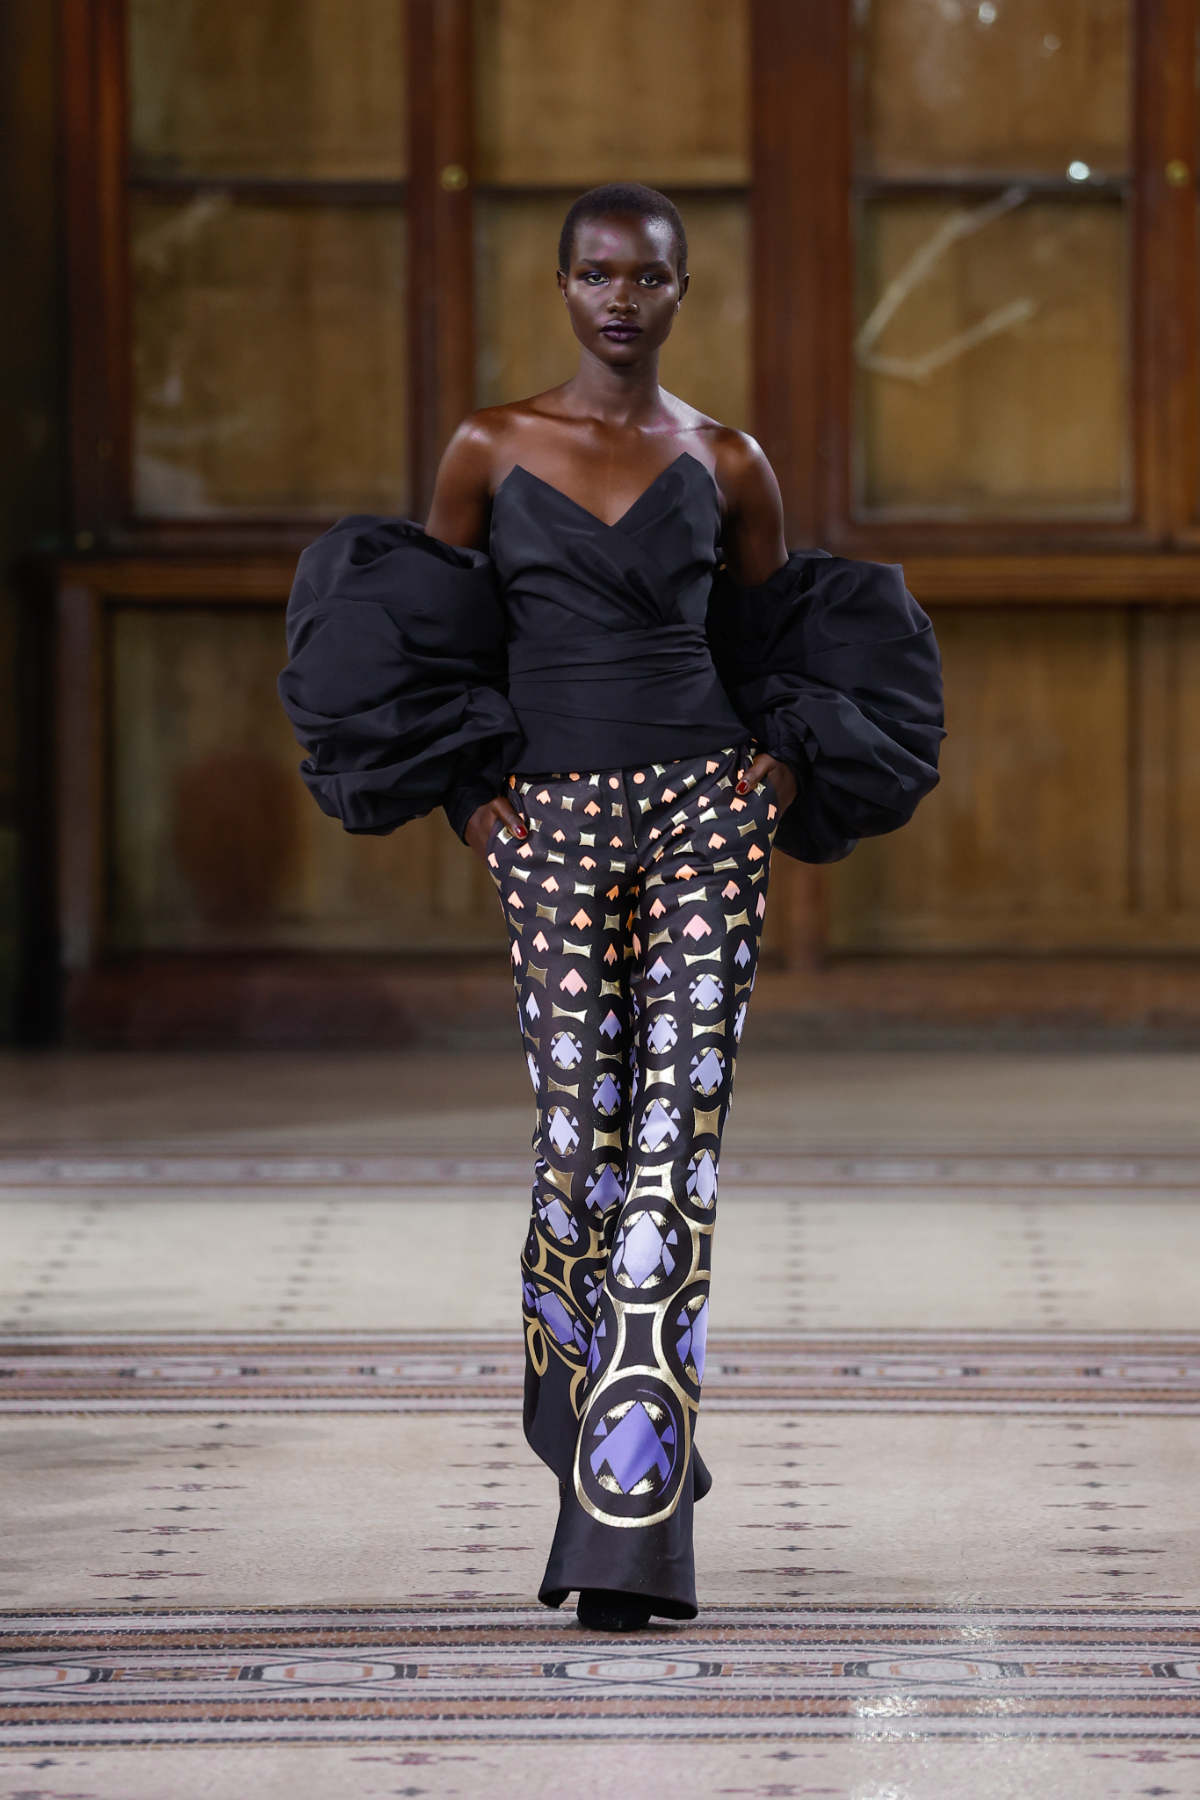 ArdAzAei Presents Its Haute Couture Fall Winter 2022/2023 Collection